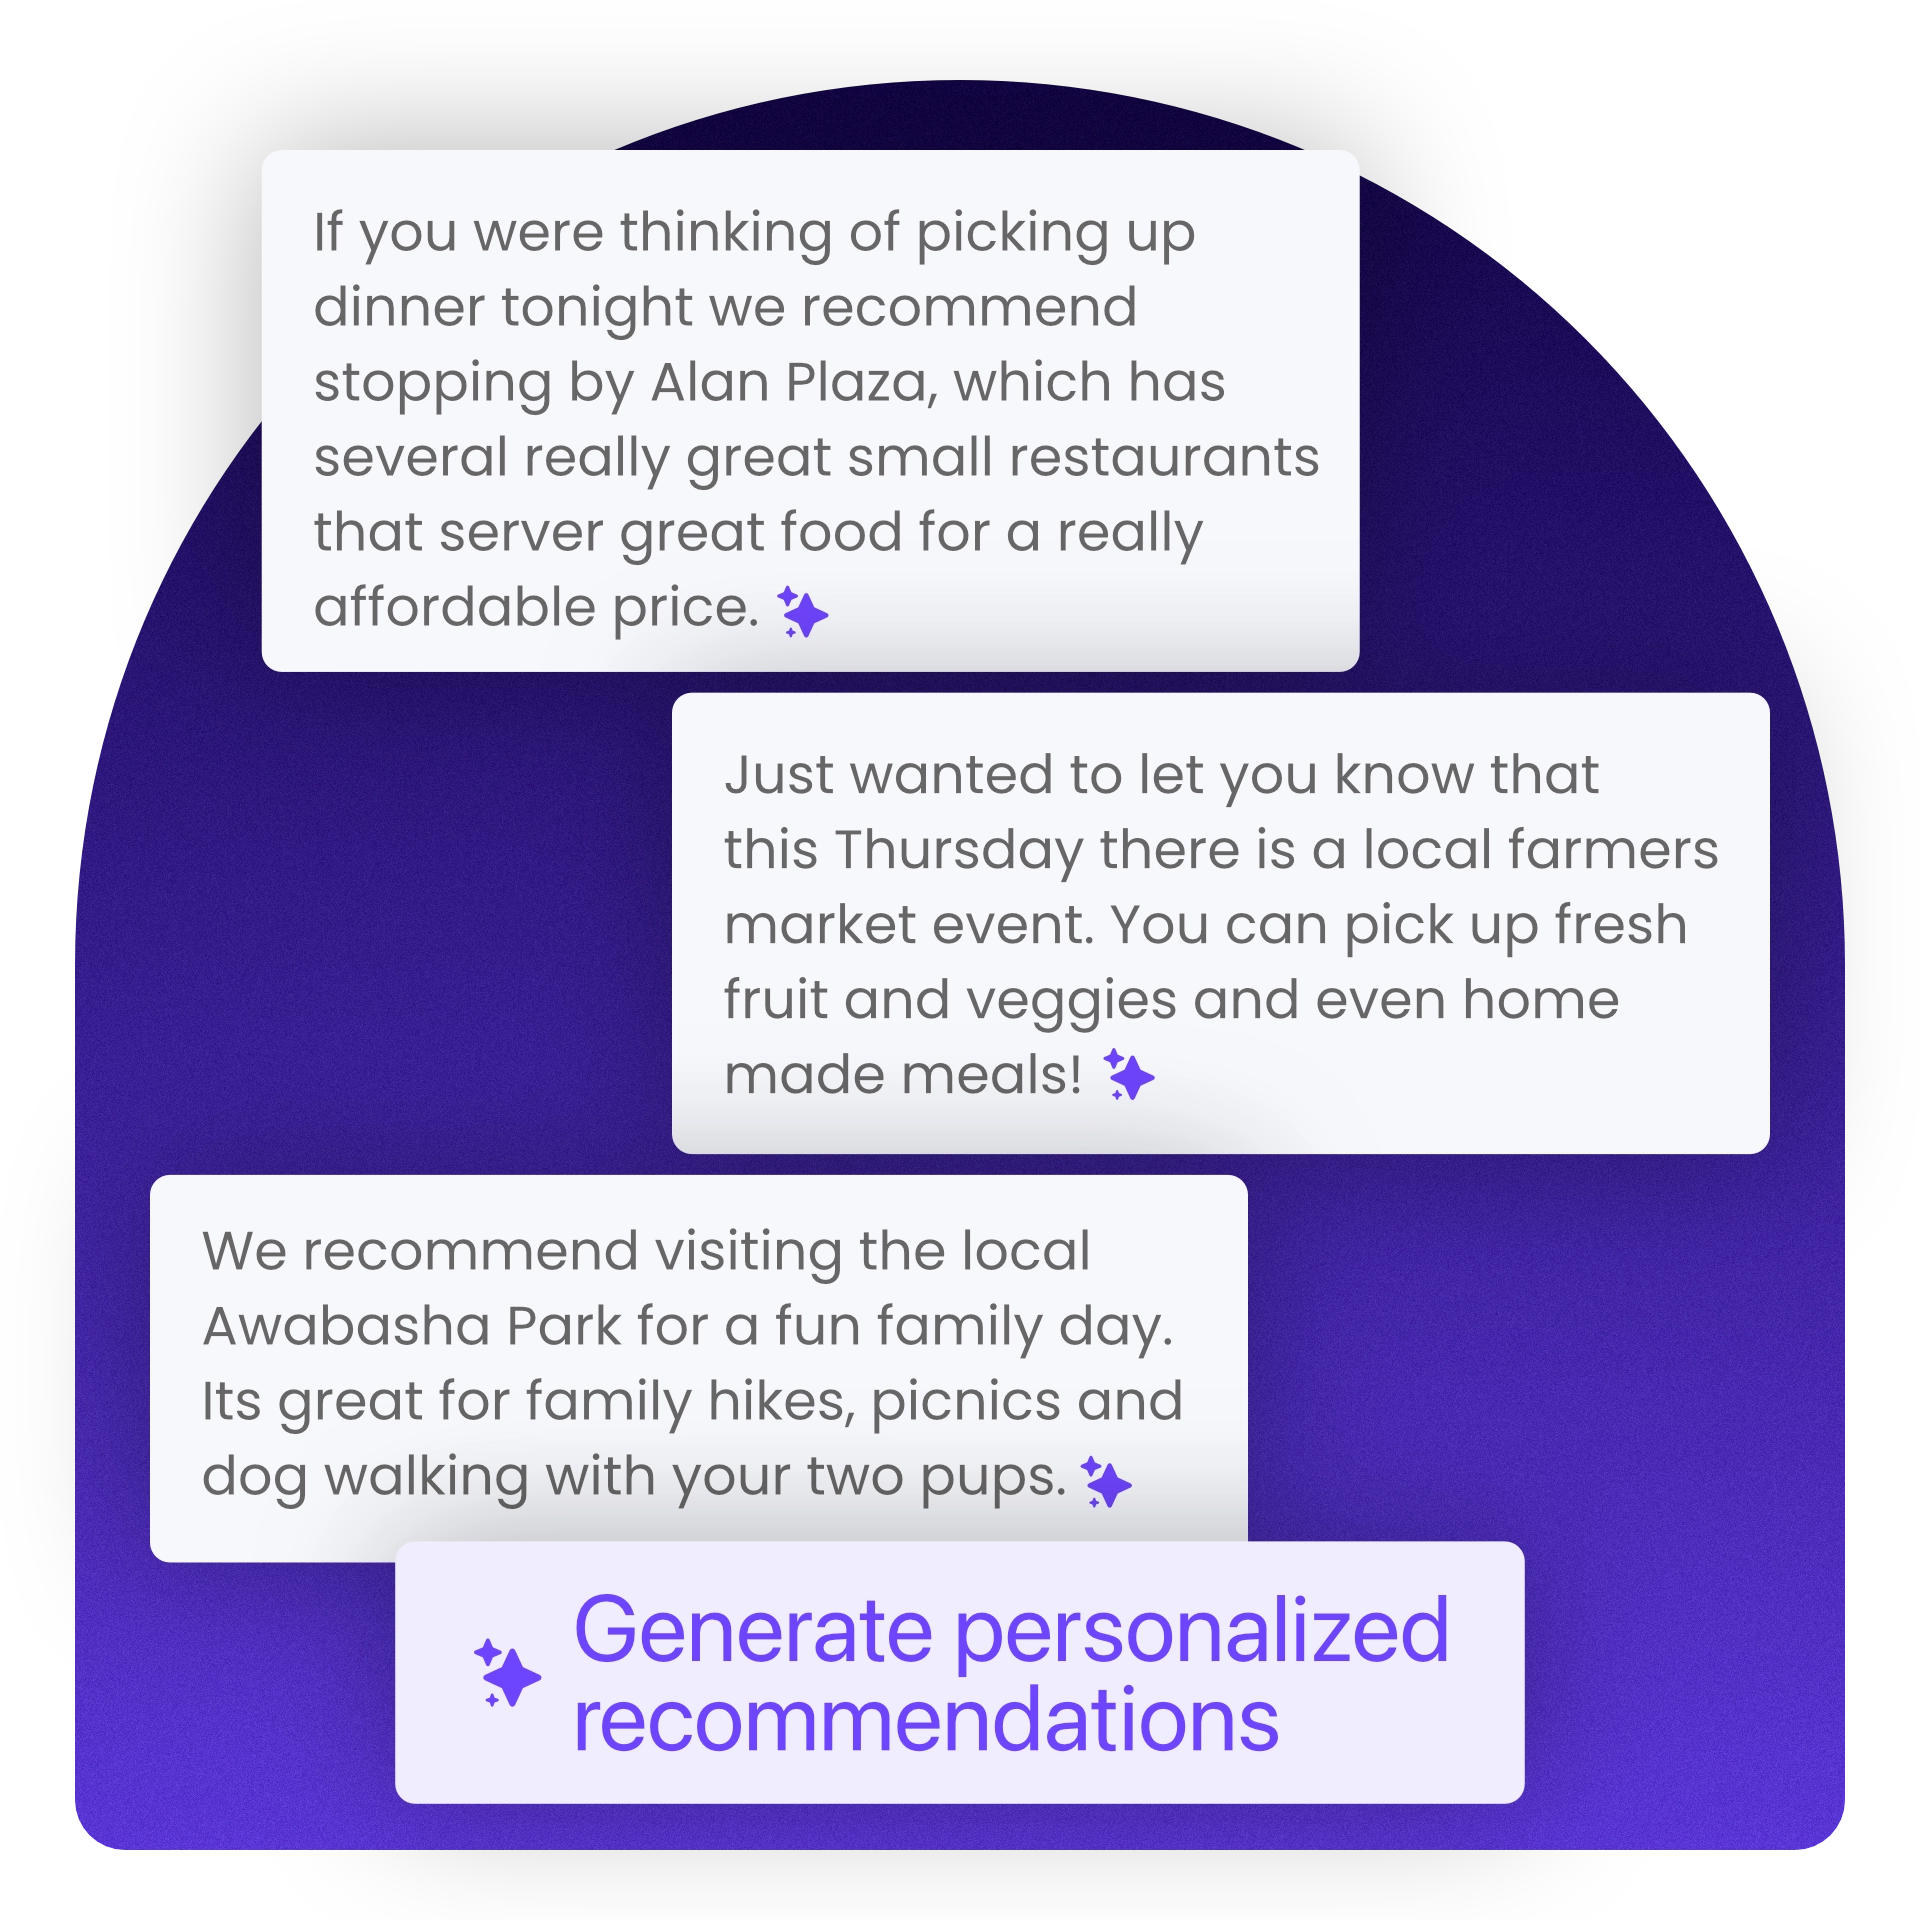 Generating personalized recommendations with AI